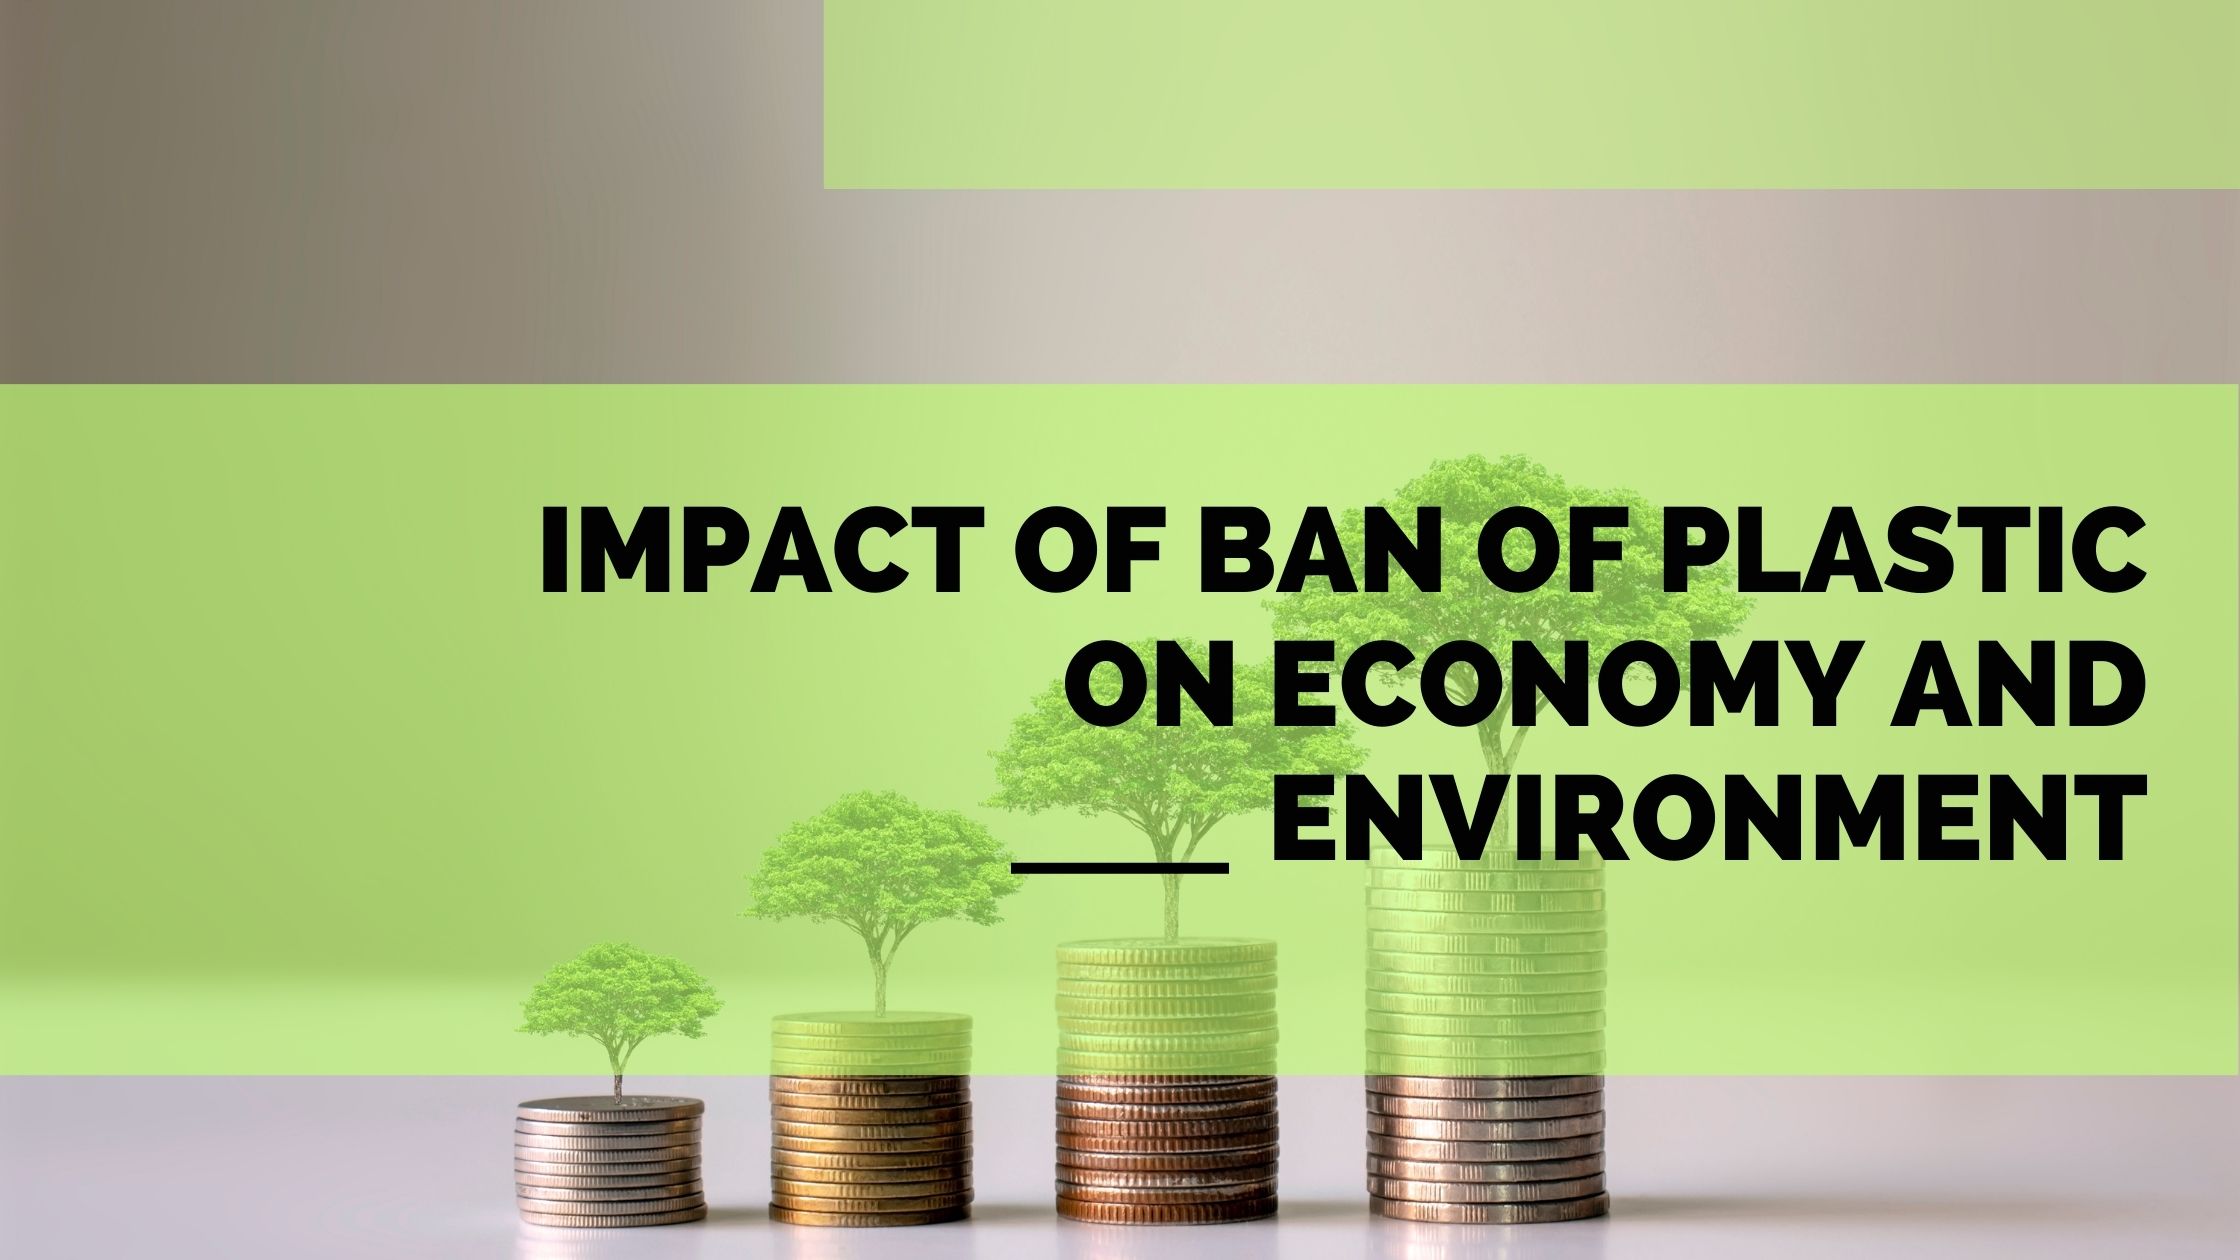 Impact of Ban of Plastic on Economy and Environment